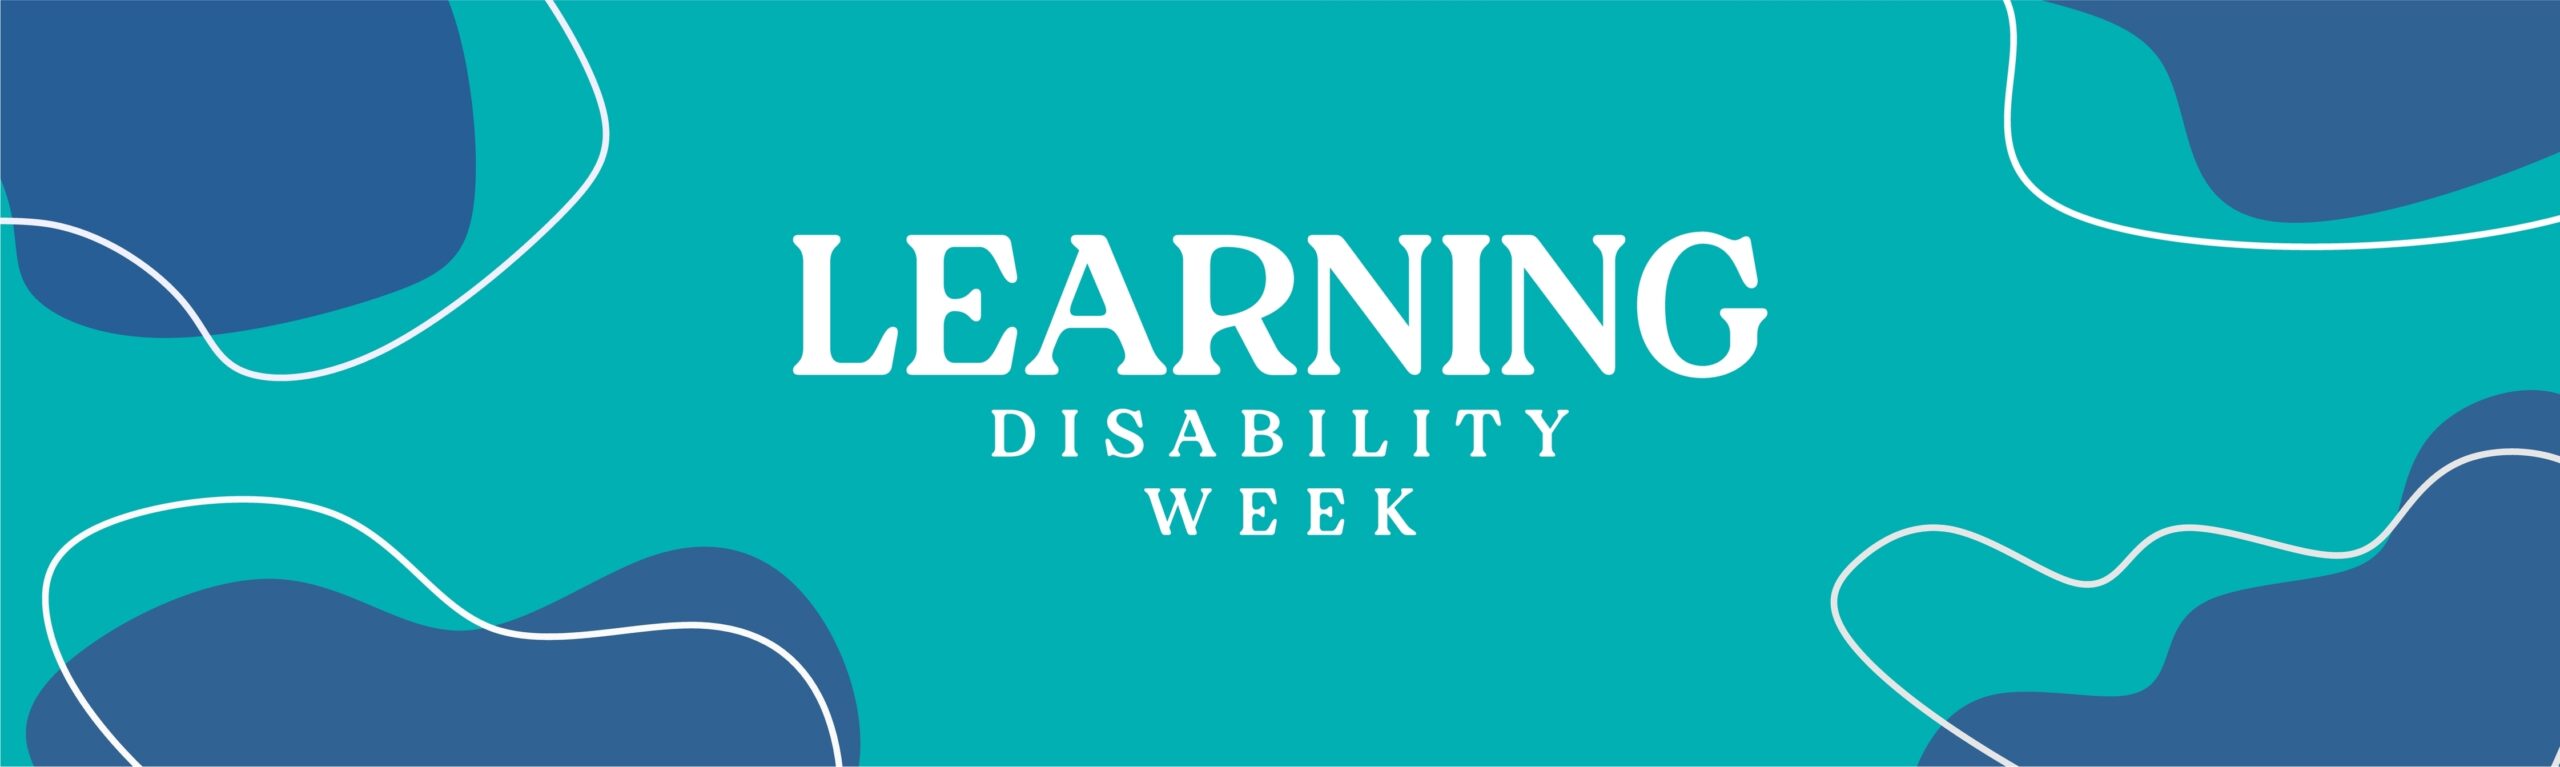 learning disability week banner